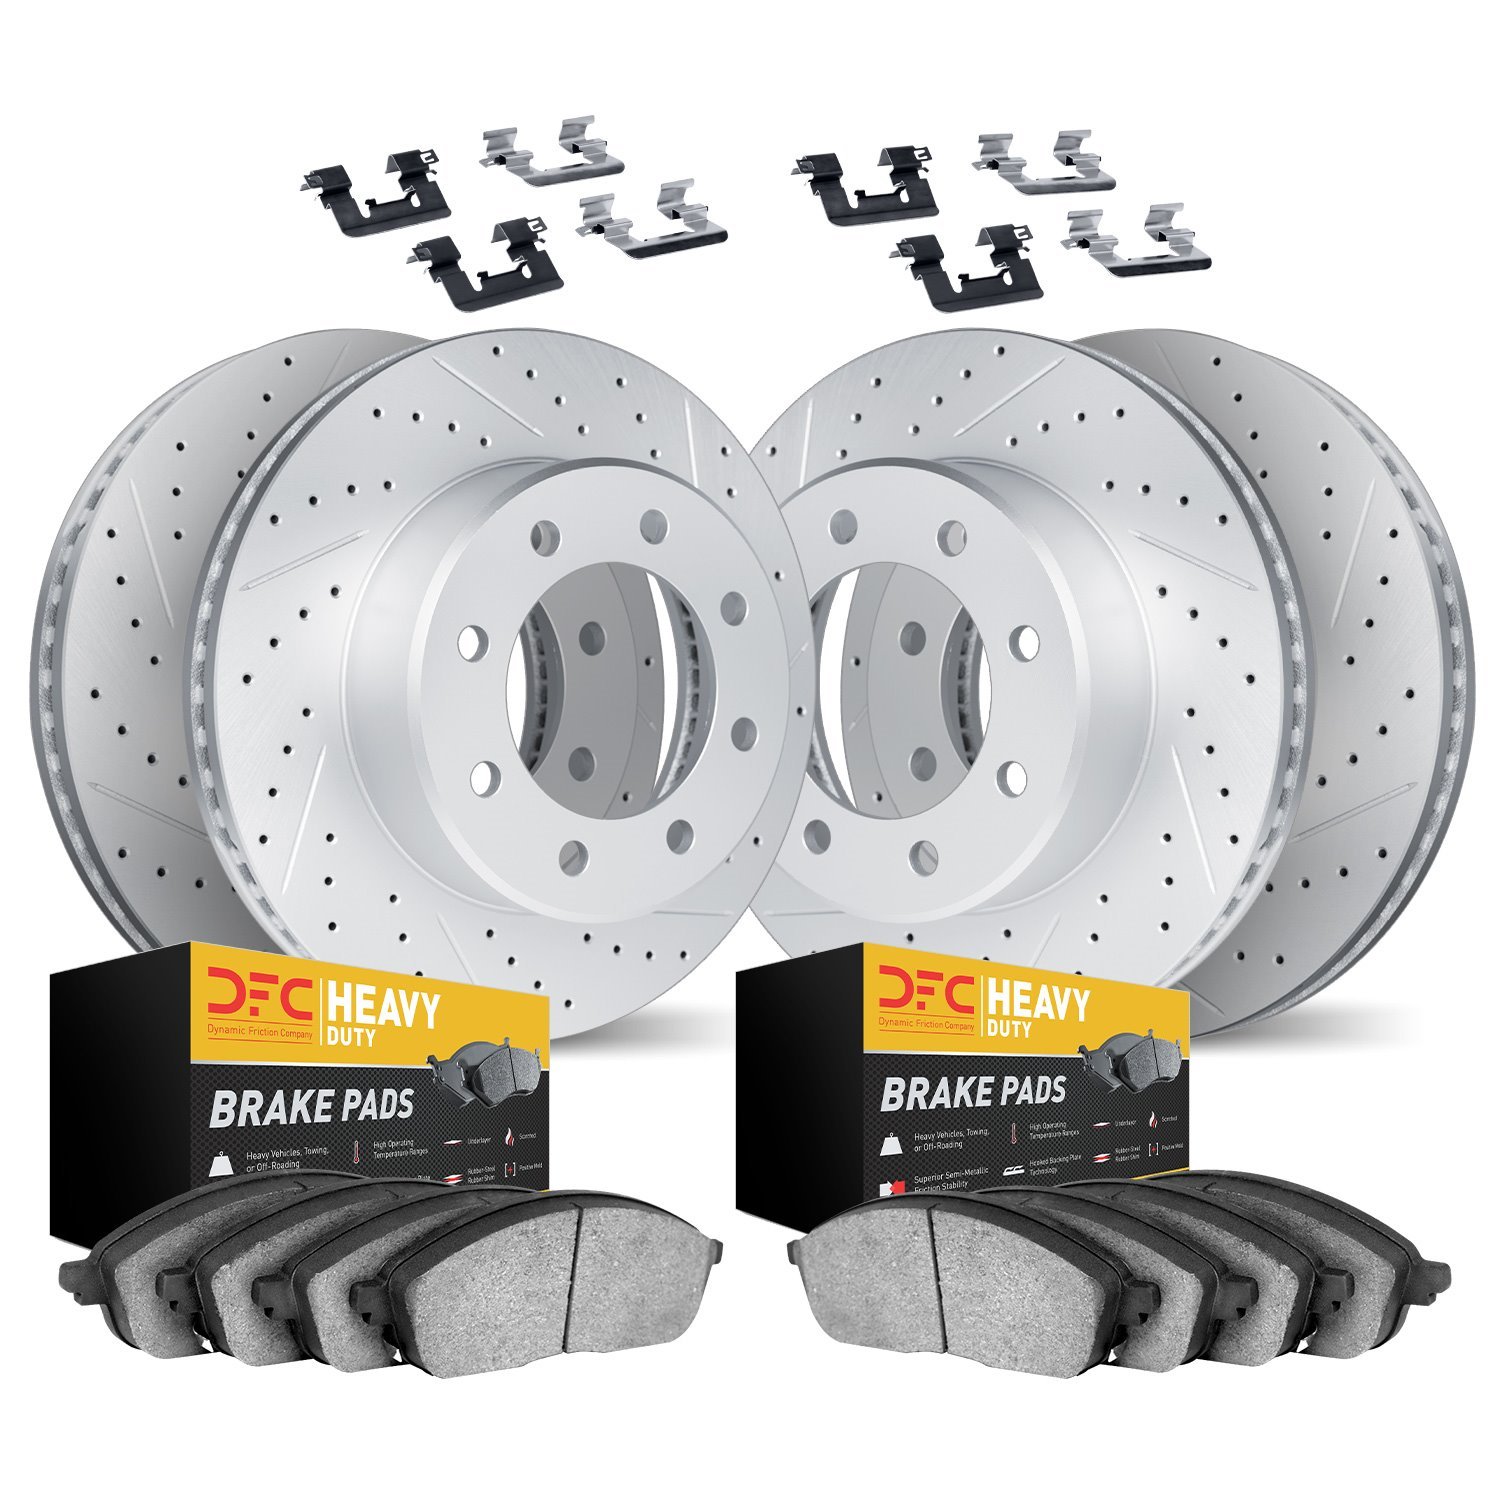 2214-99081 Geoperformance Drilled/Slotted Rotors w/Heavy-Duty Pads Kit & Hardware, 2010-2011 Ford/Lincoln/Mercury/Mazda, Positio